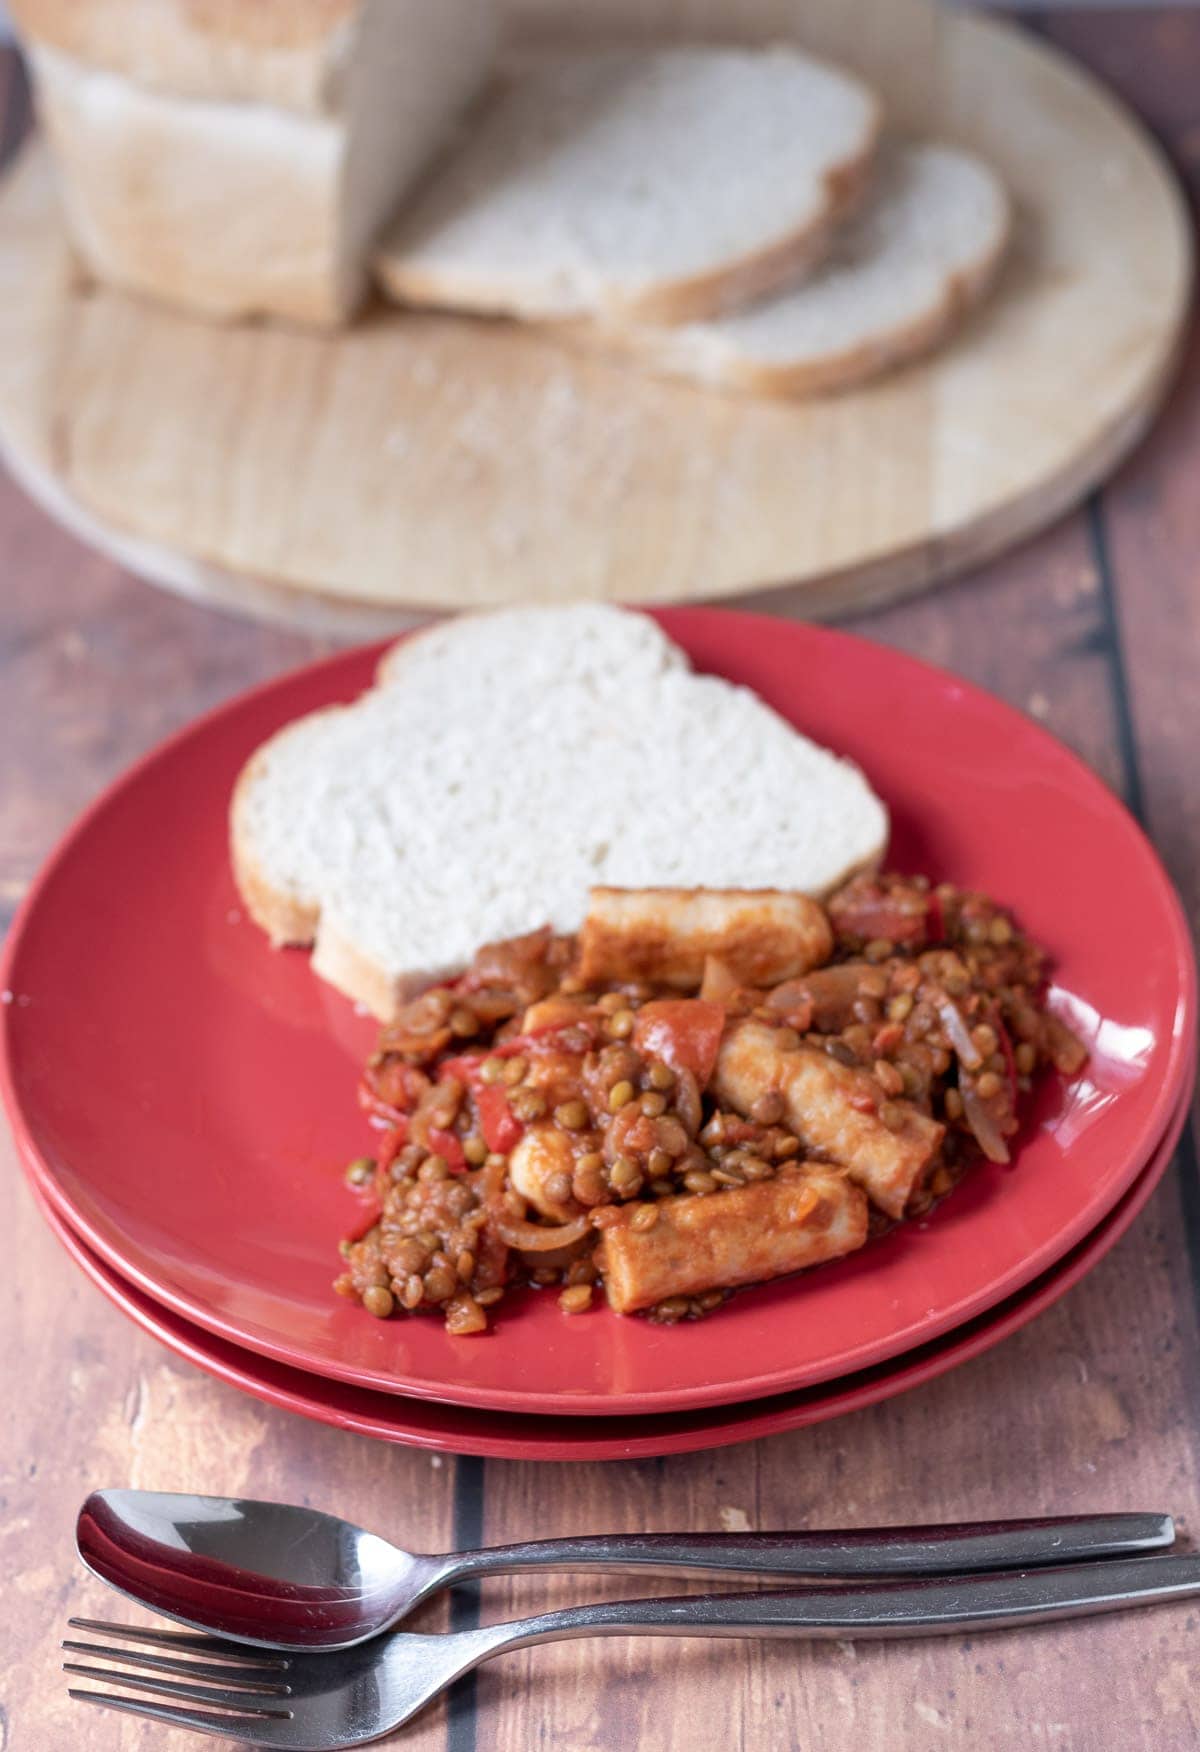 Sausage and lentil casserole served on a plate with a slice of bread. Spoon to the front and a loaf of bread cut on a board in the background.